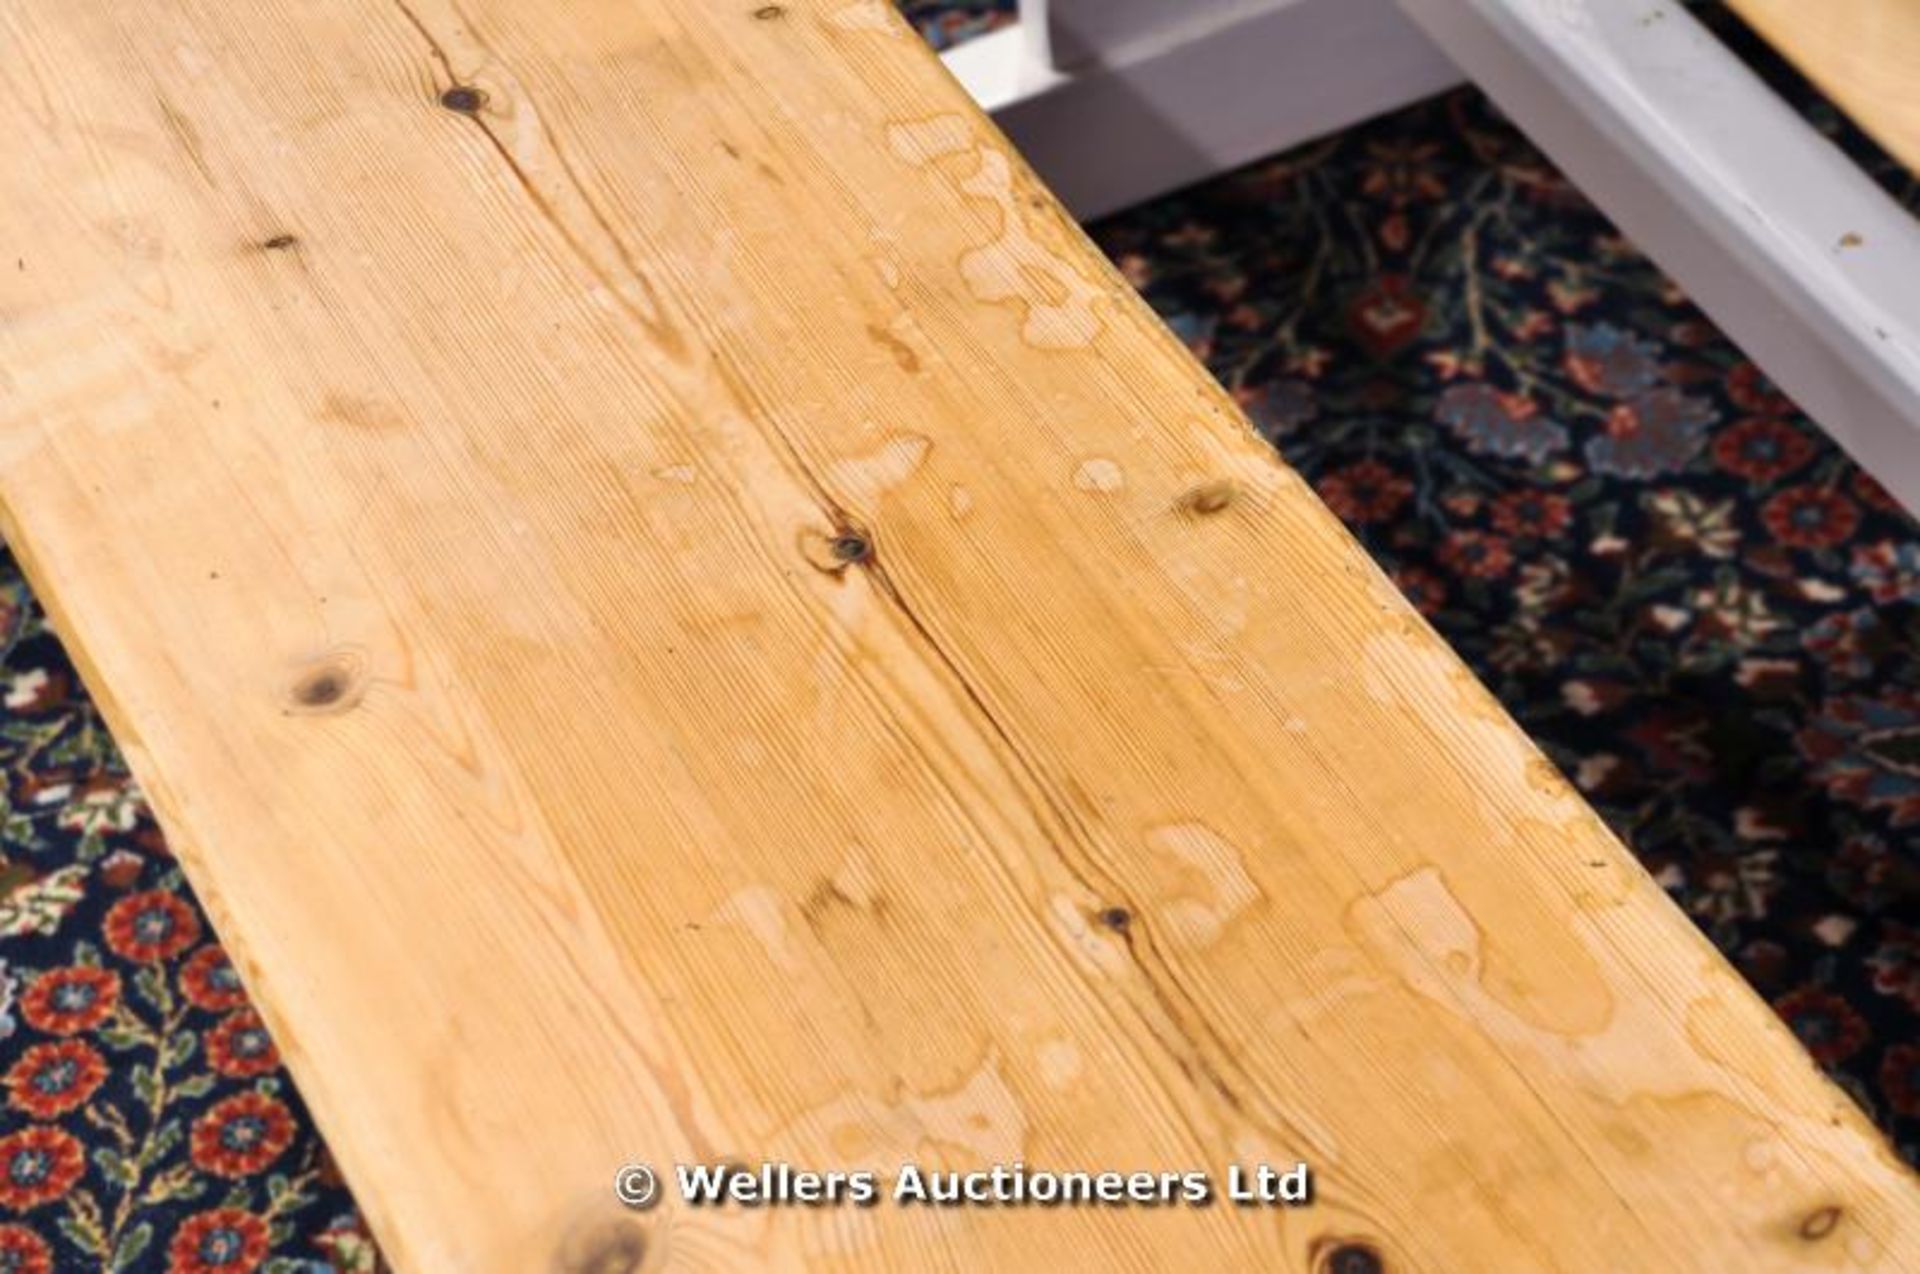 A pine conservatory table with two benches, legs and stretchers painted white - Image 3 of 5